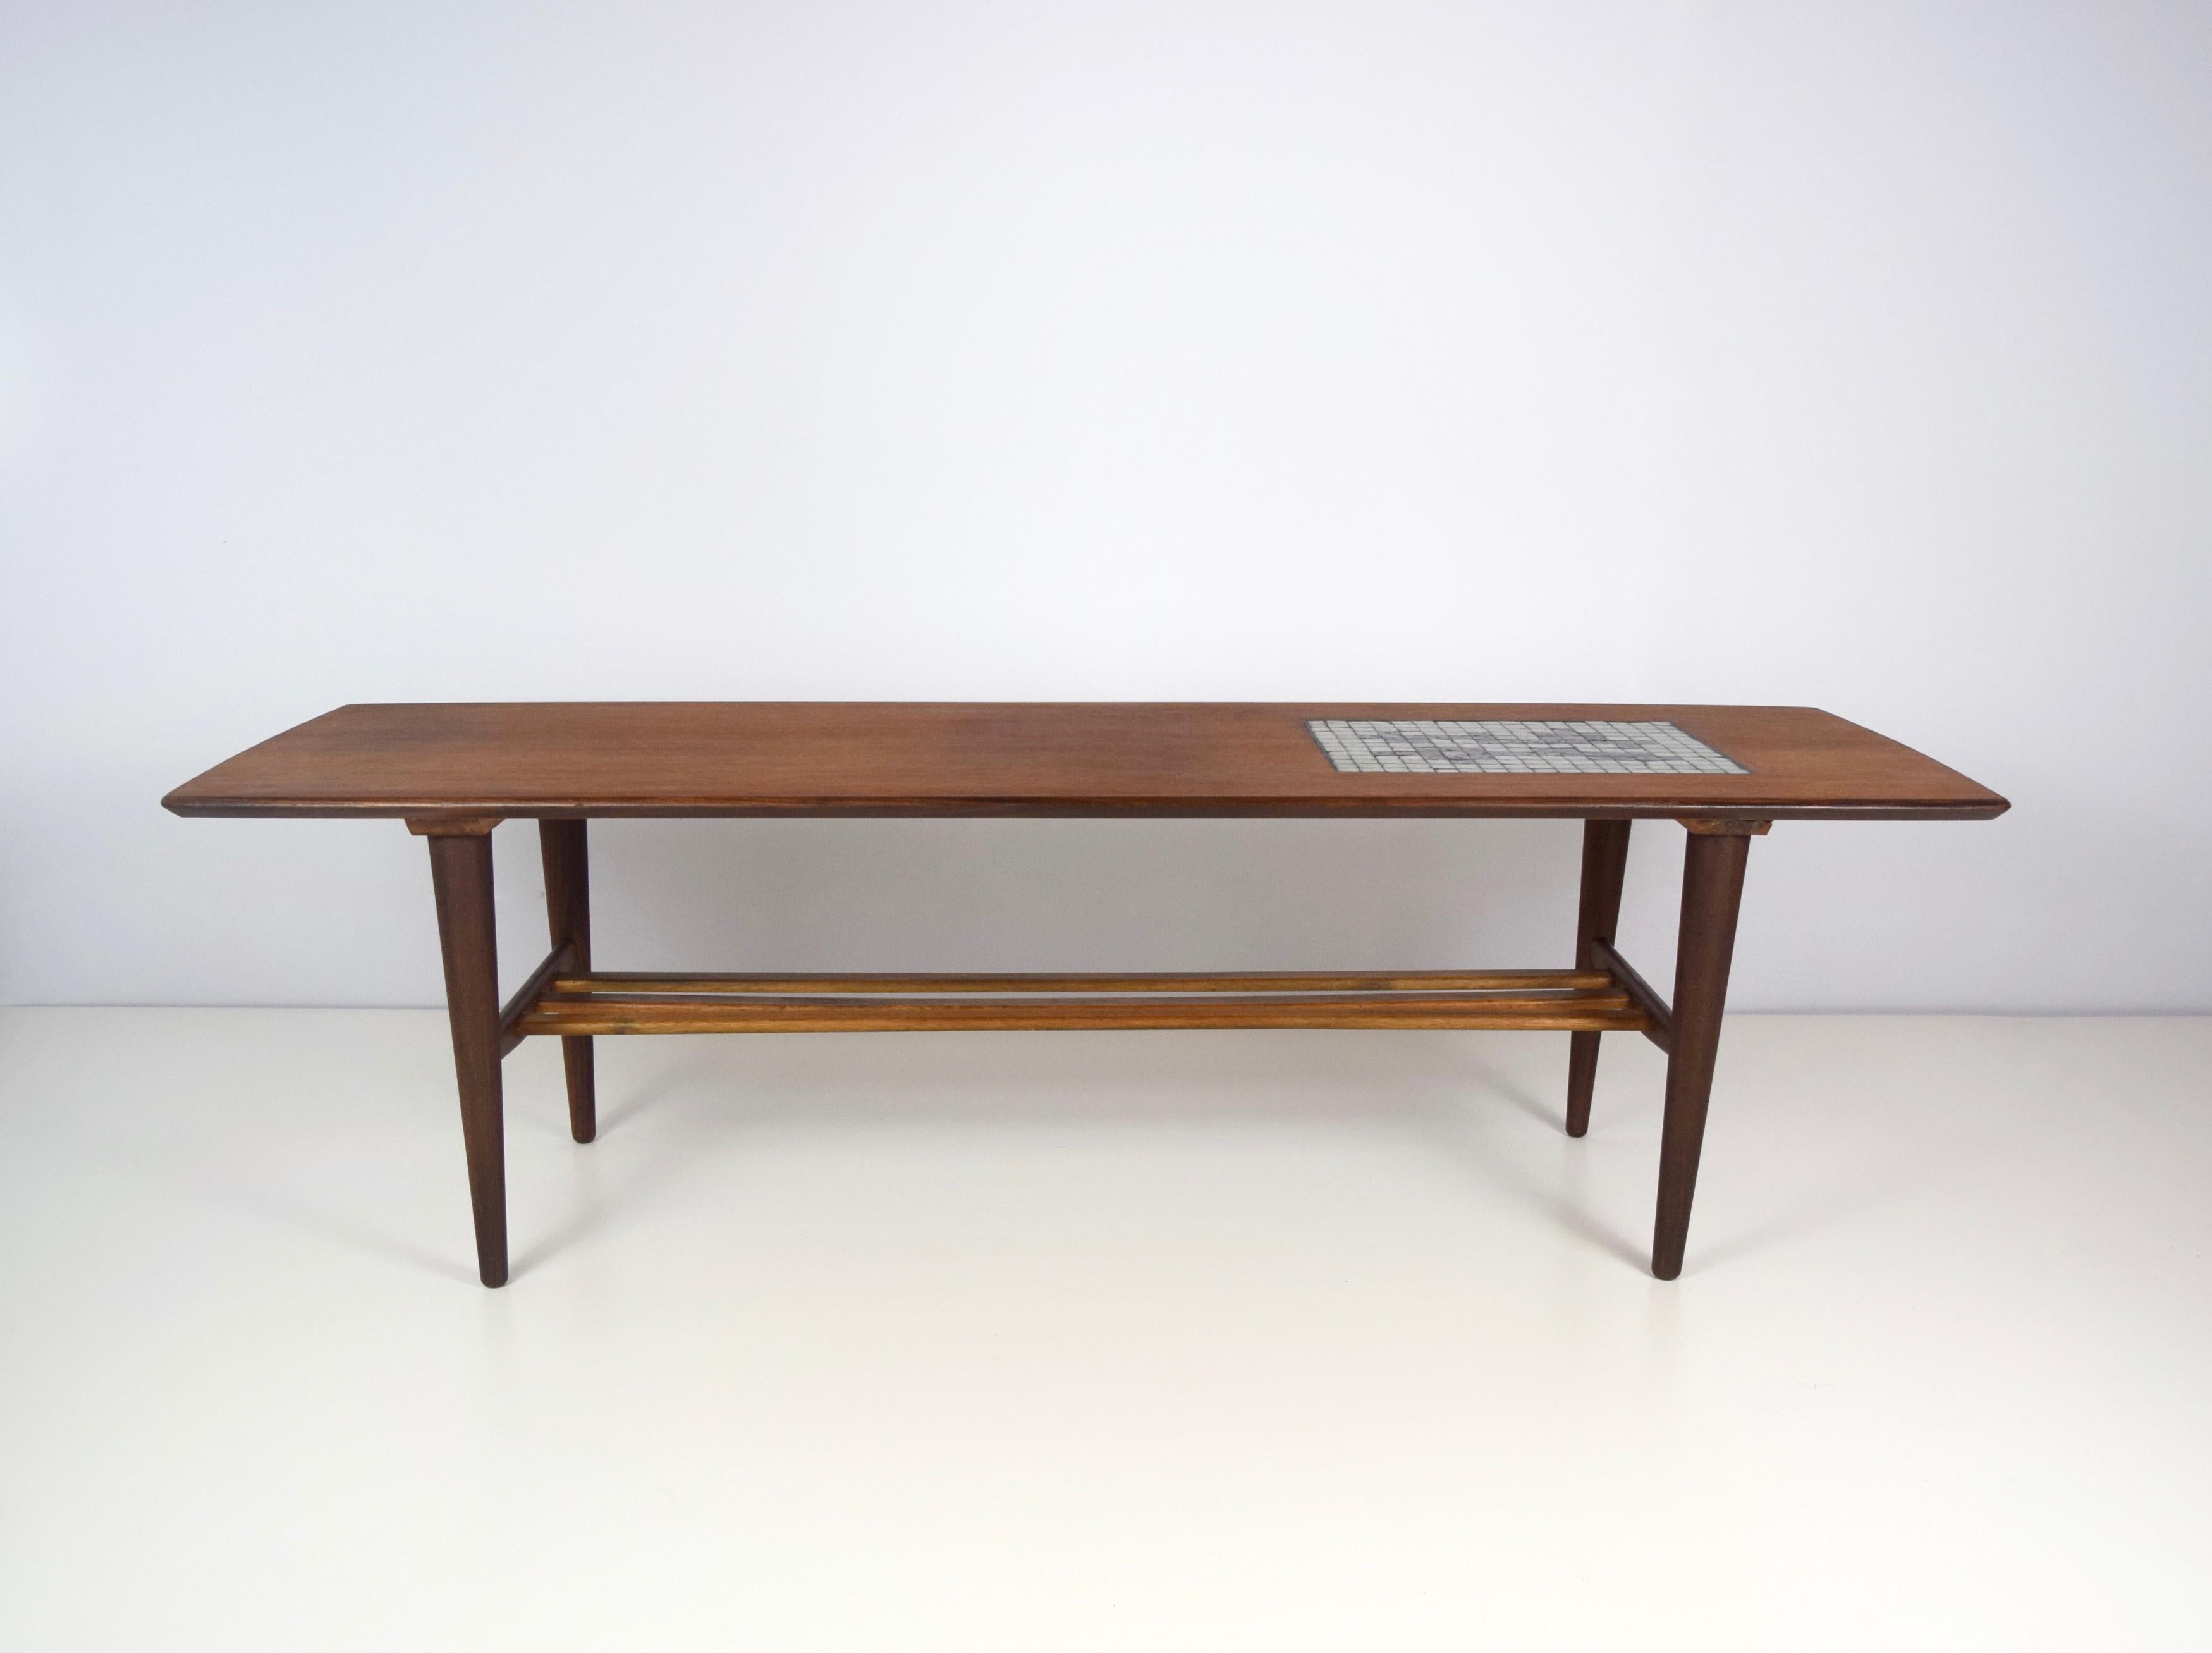 Beautiful coffee table by Louis Van Teeffelen with Mosaic of Jaap Ravelli for Webe, The Netherlands 1960s. This table is made of teak wood and has a magazine rack underneath the table. This table is also shown in the original Webe catalogus as